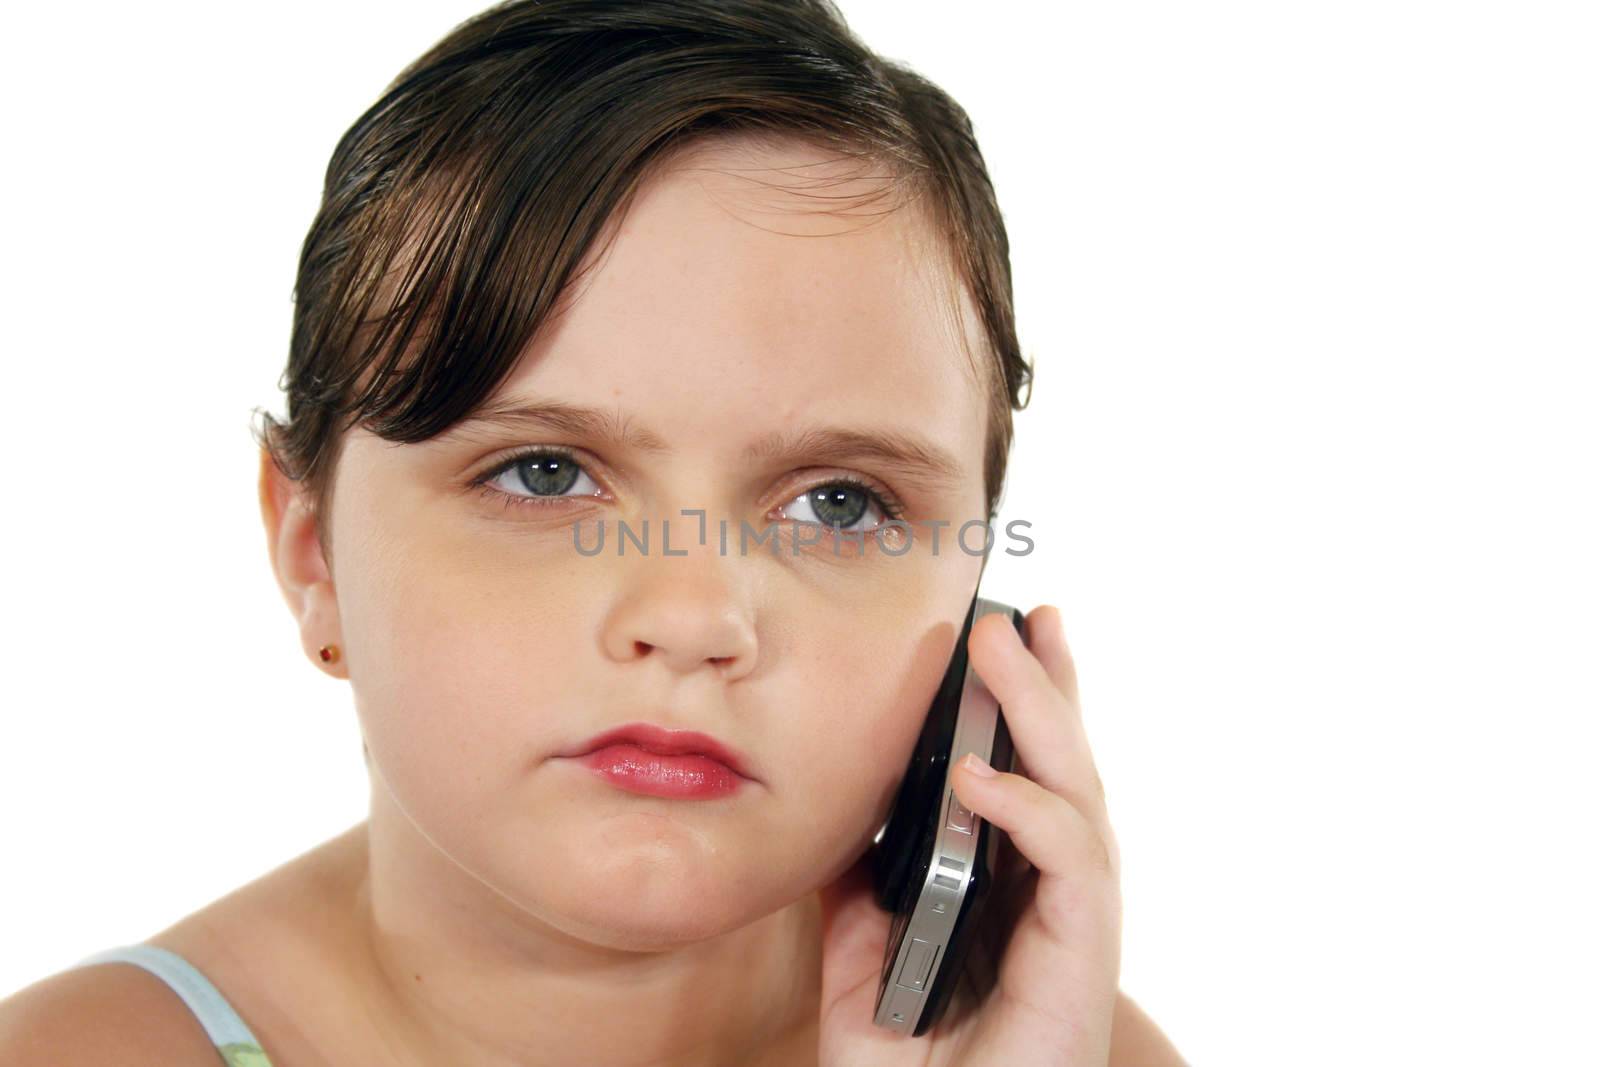 Little girl listening intently on her cell phone.